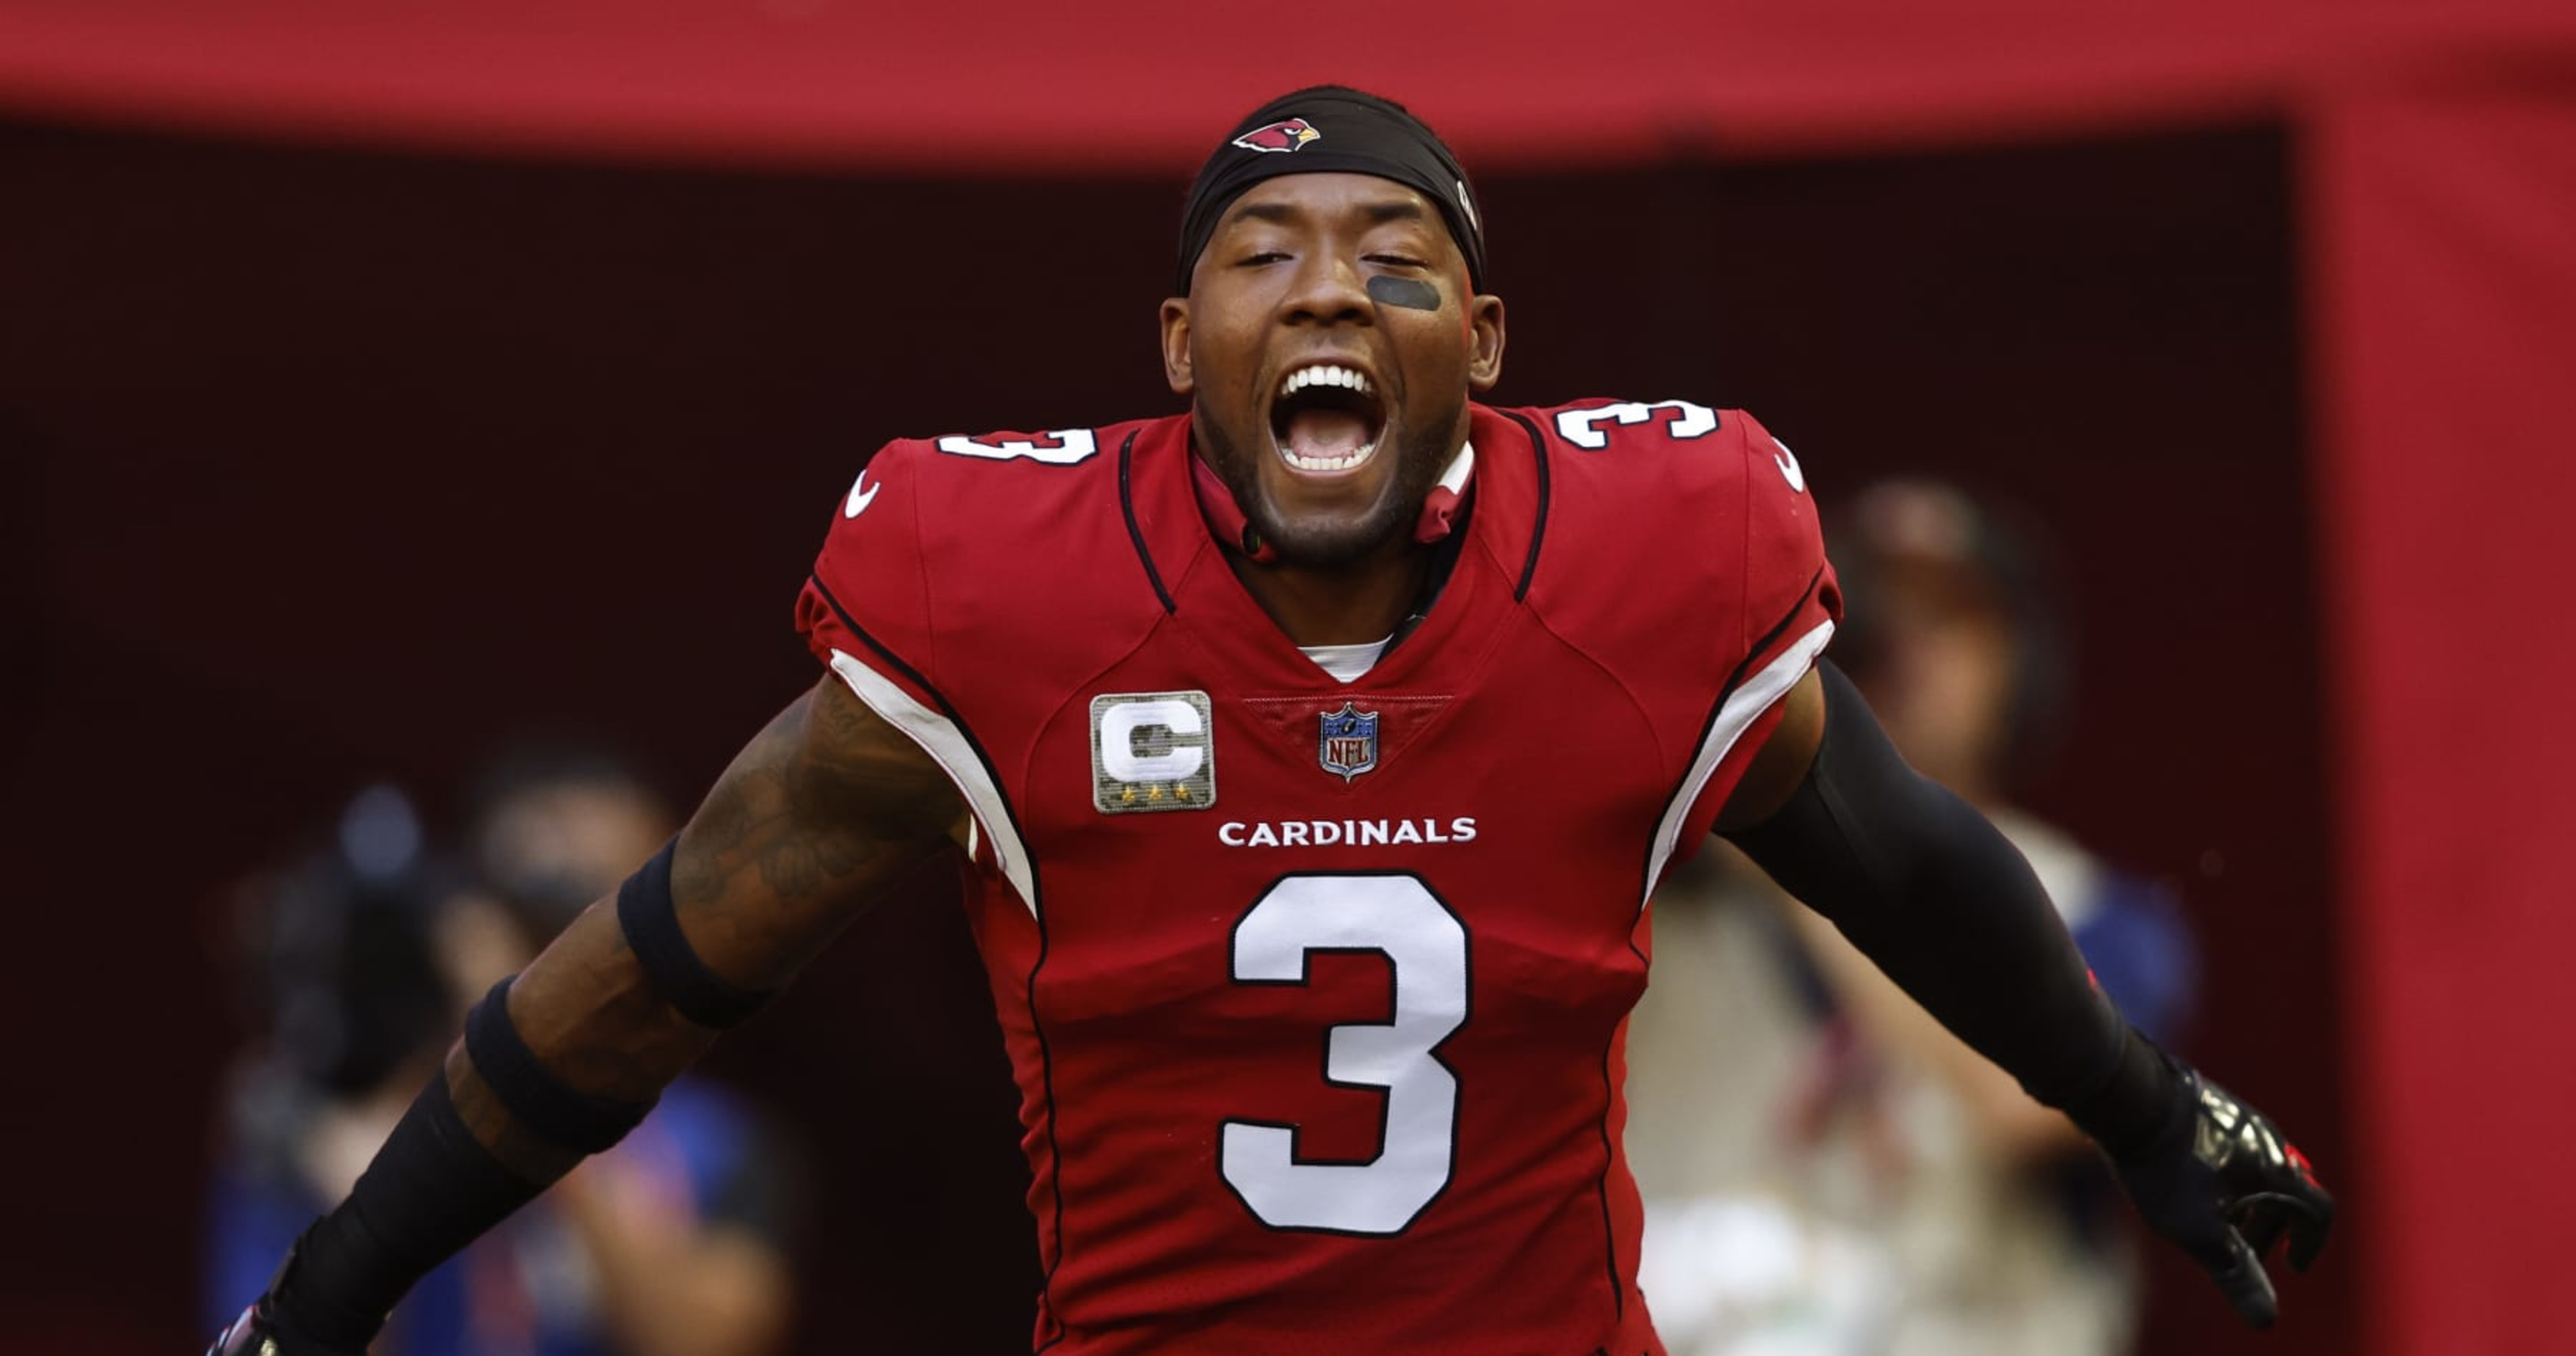 Arizona Cardinals to be featured on HBO's 'Hard Knocks